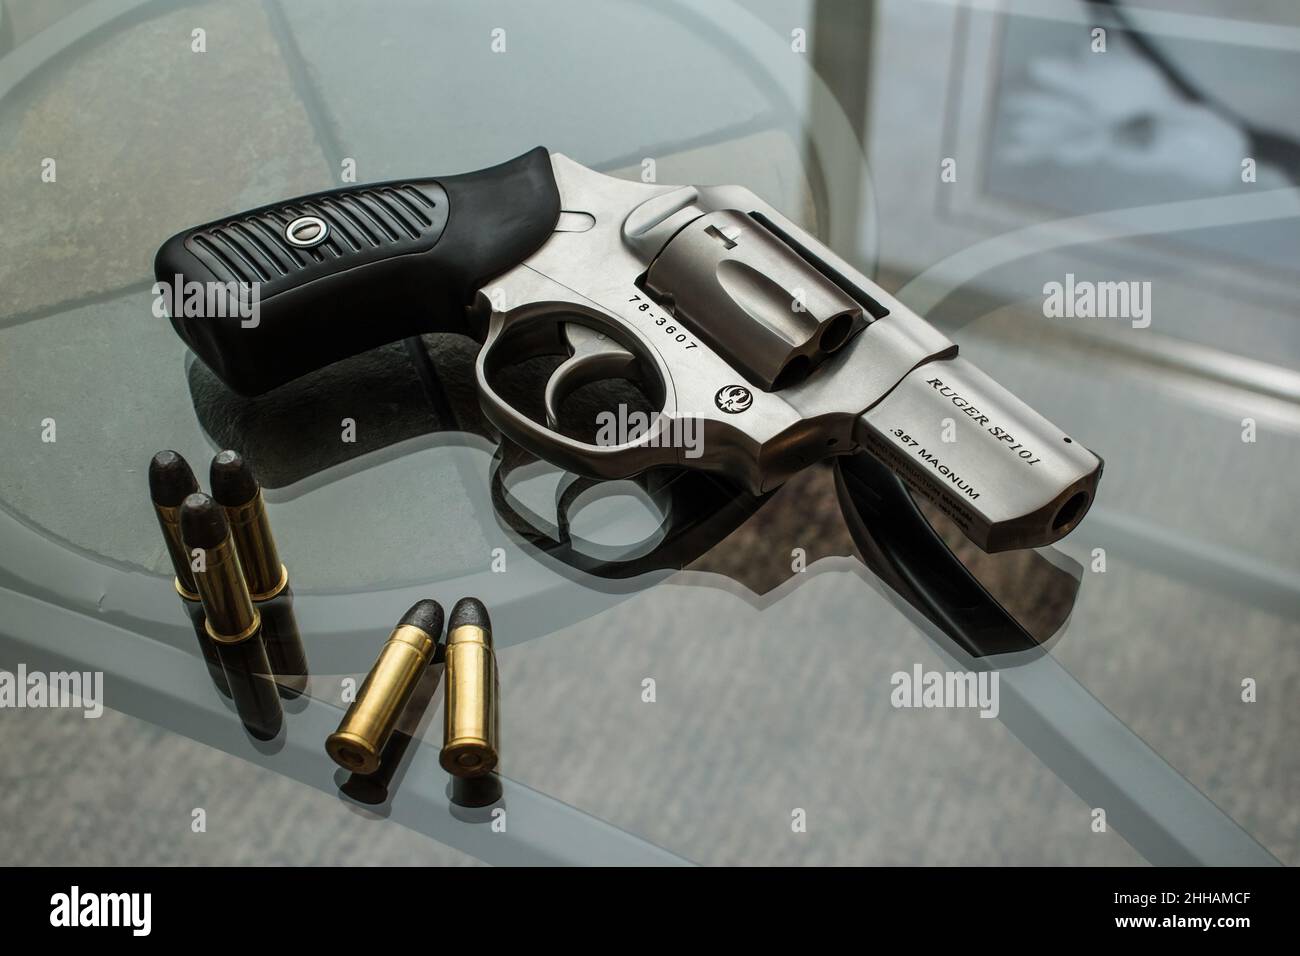 Ruger 101 .357 Magnum double action revolver on a glass table Stock Photo